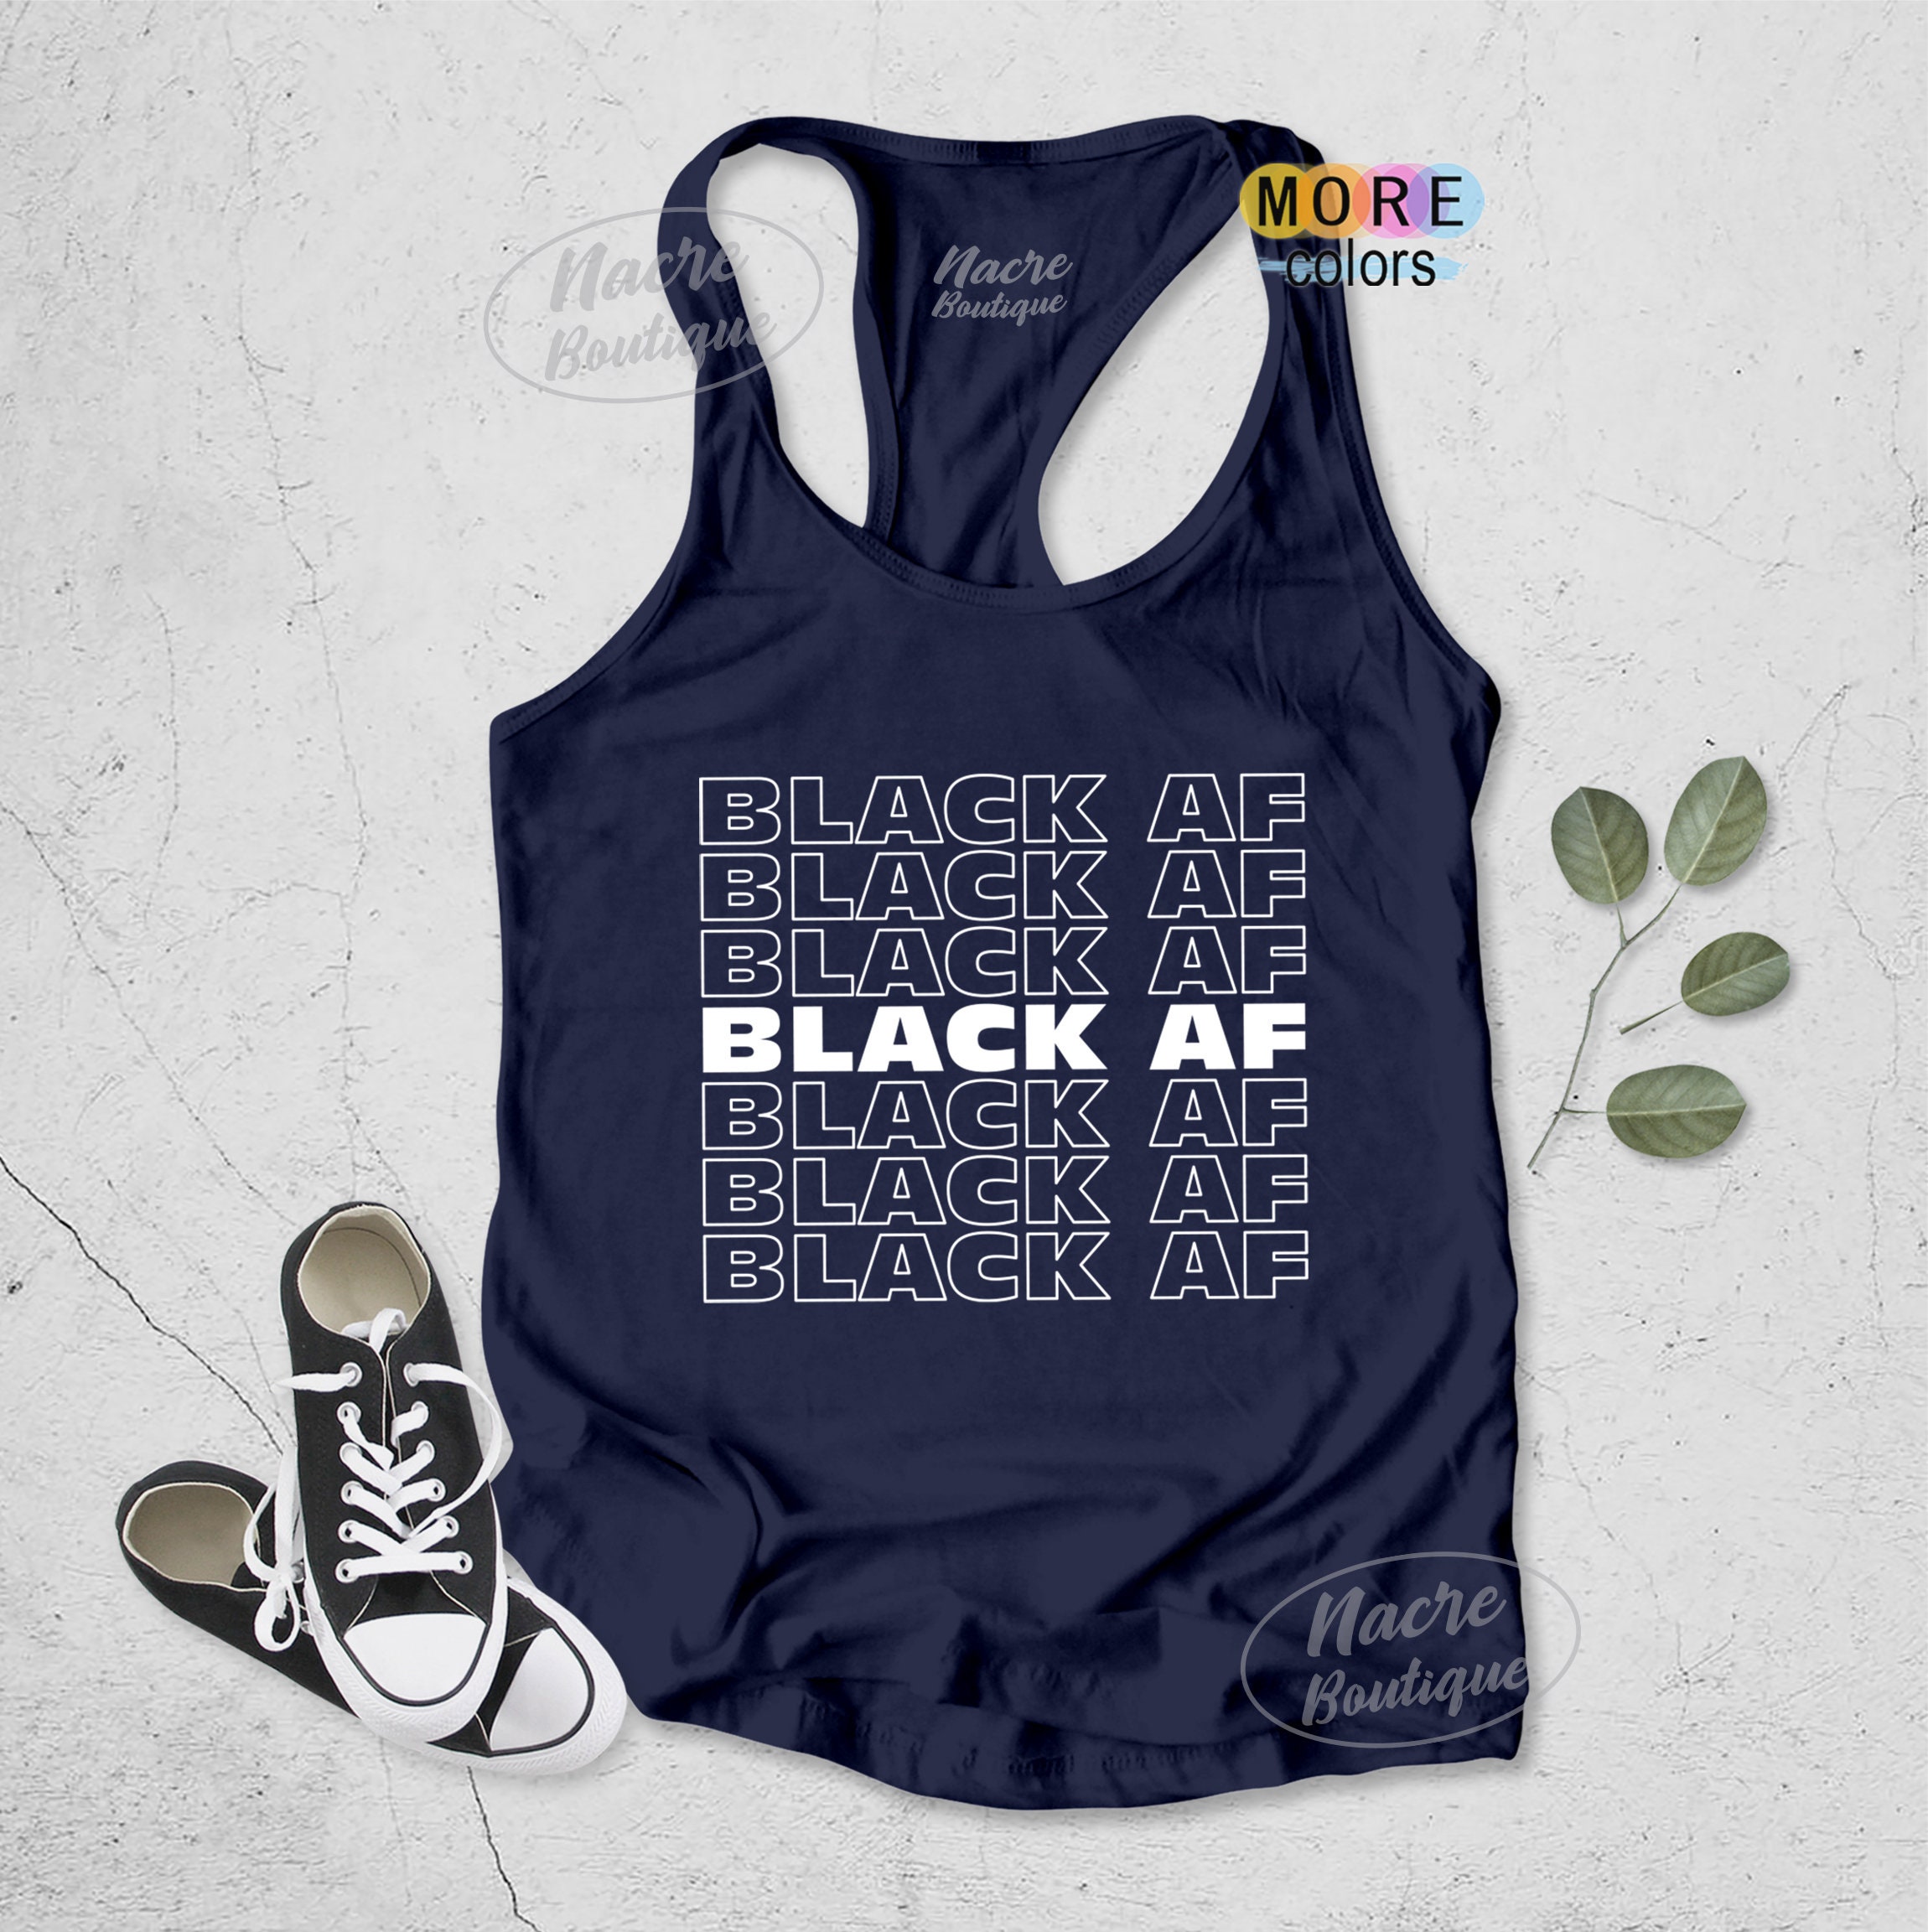 Black AF Shirt Have A Nice Day Shirts Have A Nice Day Shirt - Etsy México